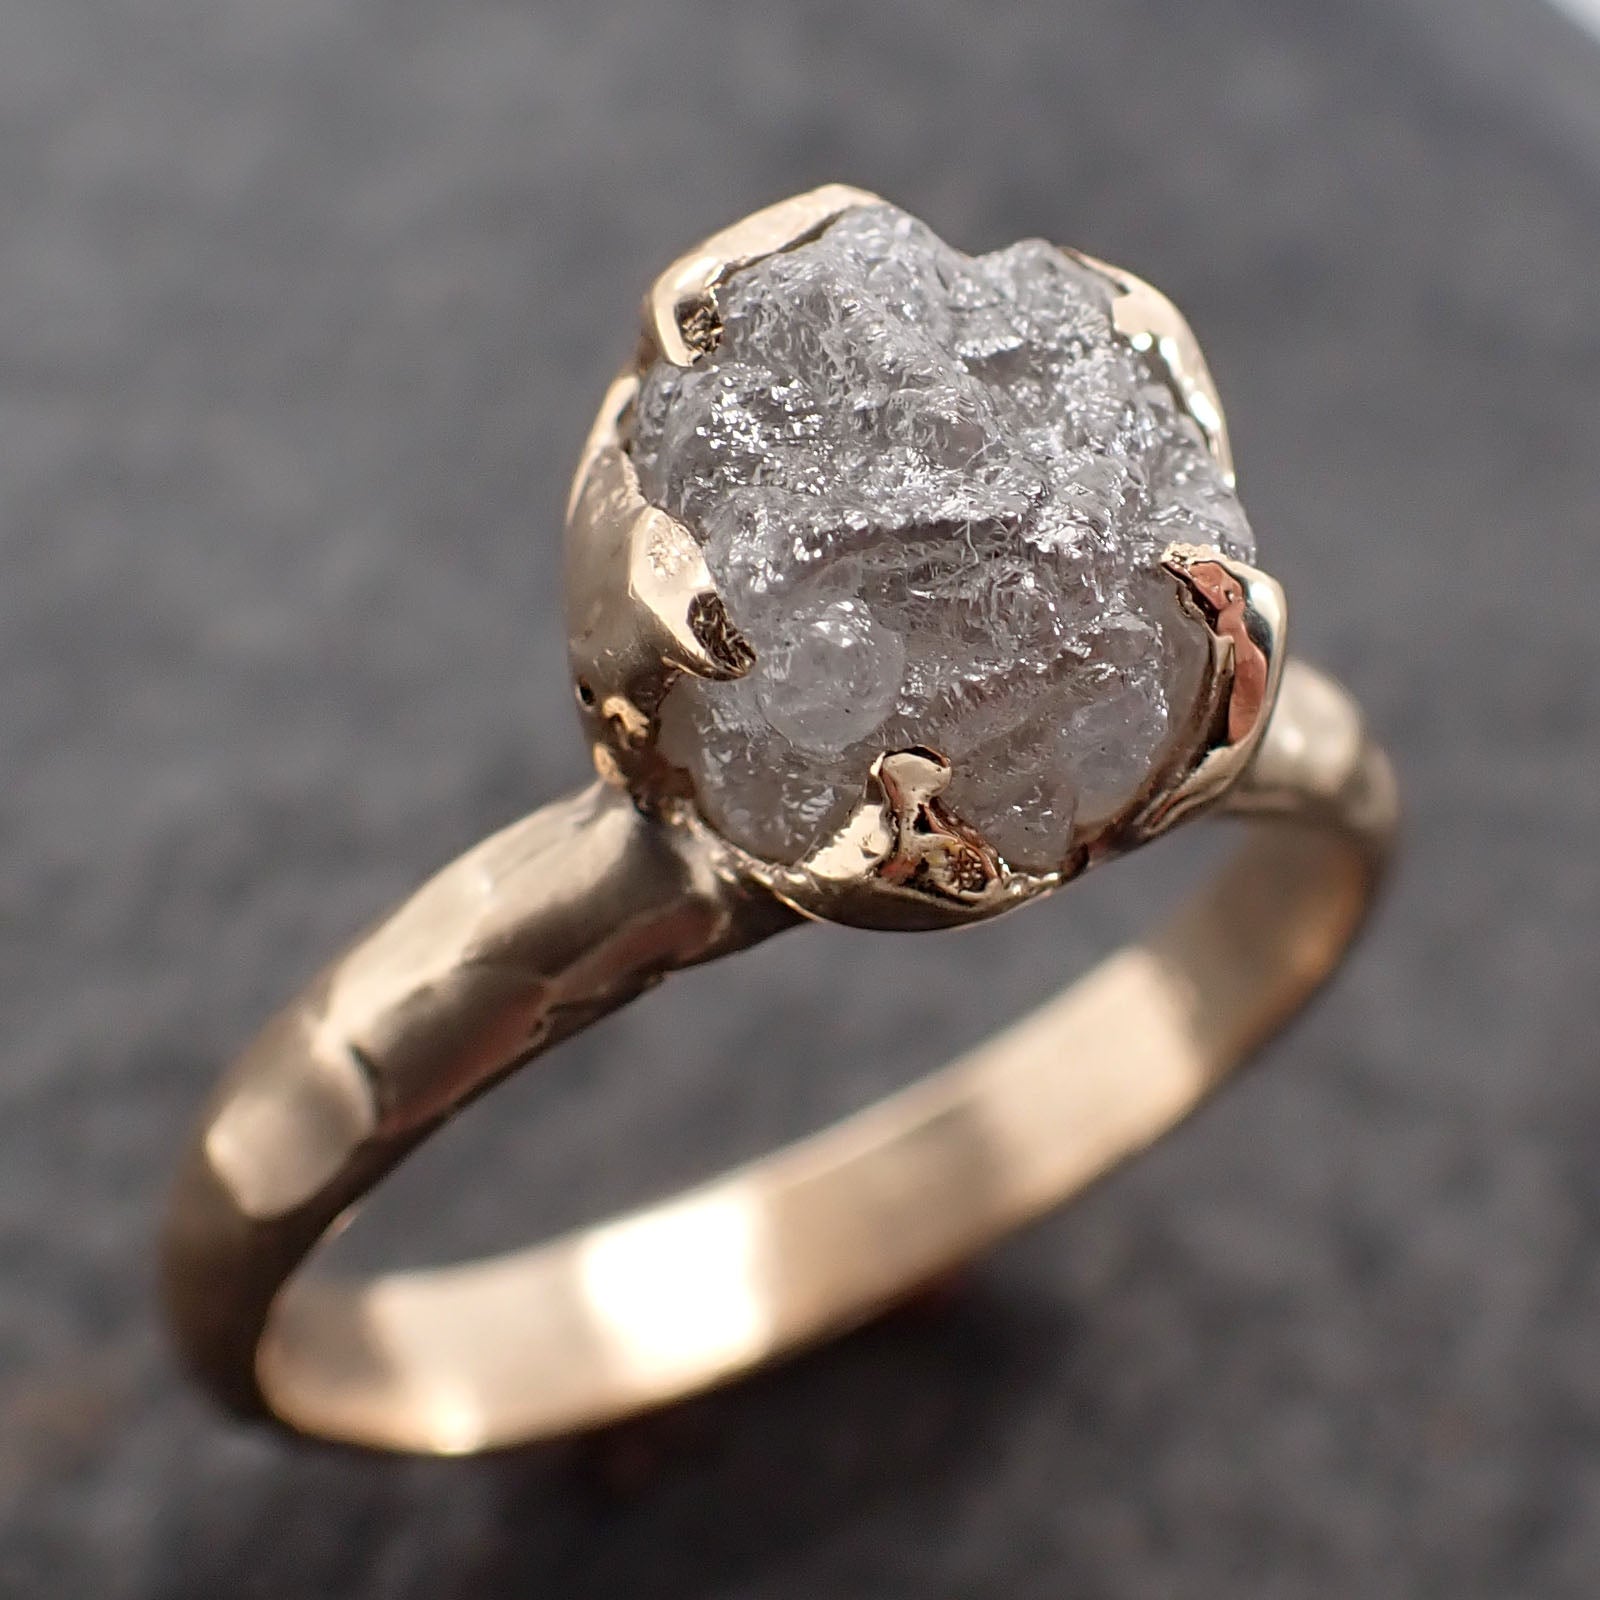 Raw Diamond Engagement Ring Rough Uncut Diamond Solitaire Recycled 14k yellow gold Conflict Free Diamond Wedding Promise 2708